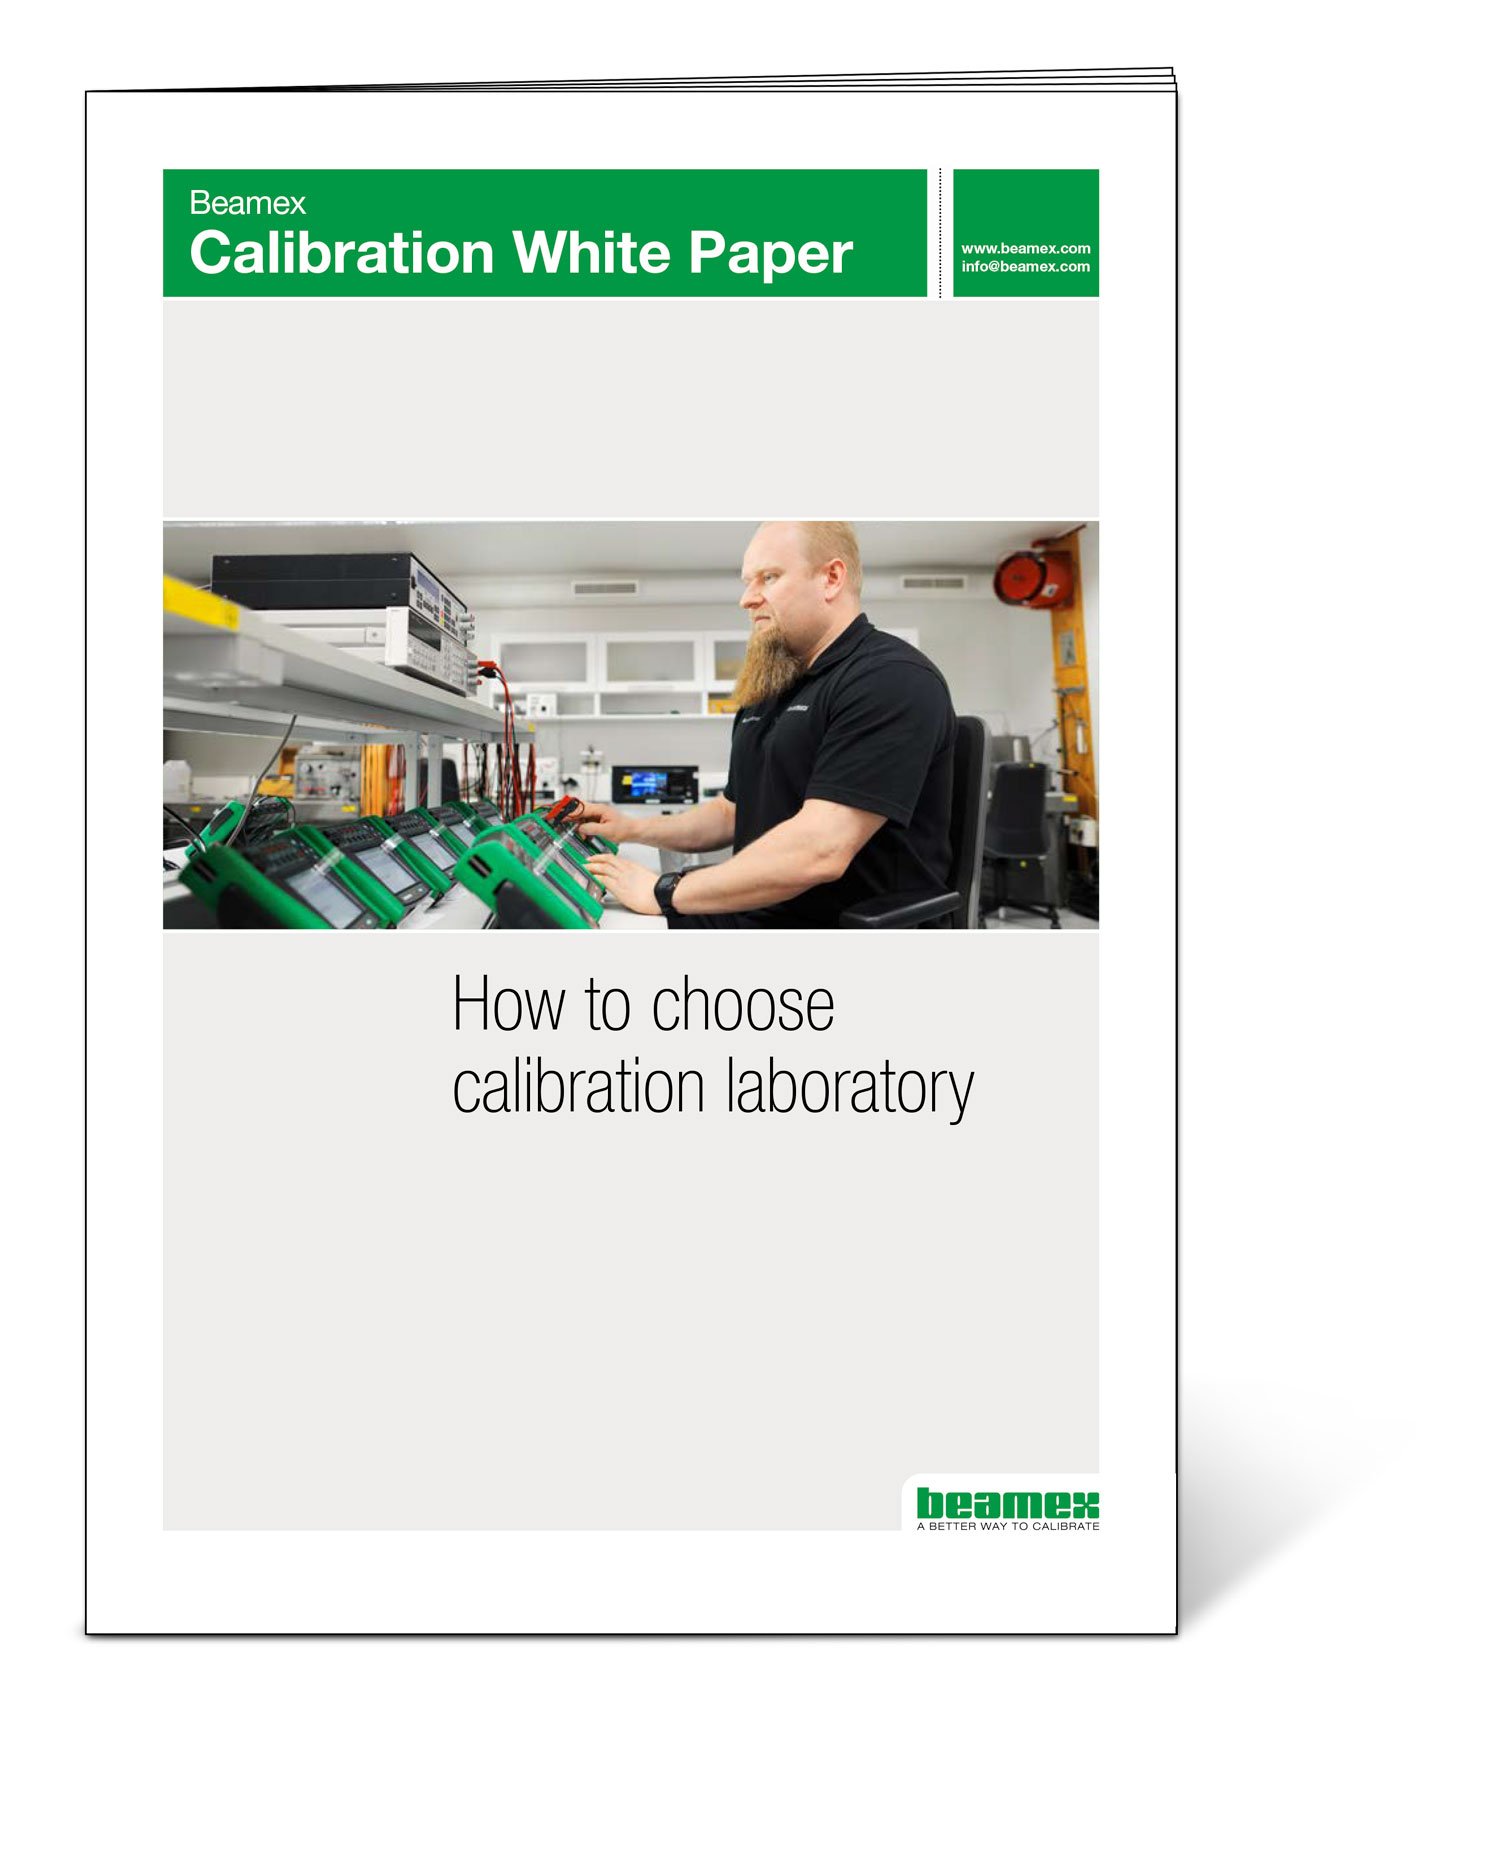 Beamex White Paper - How to choose calibration laboratory